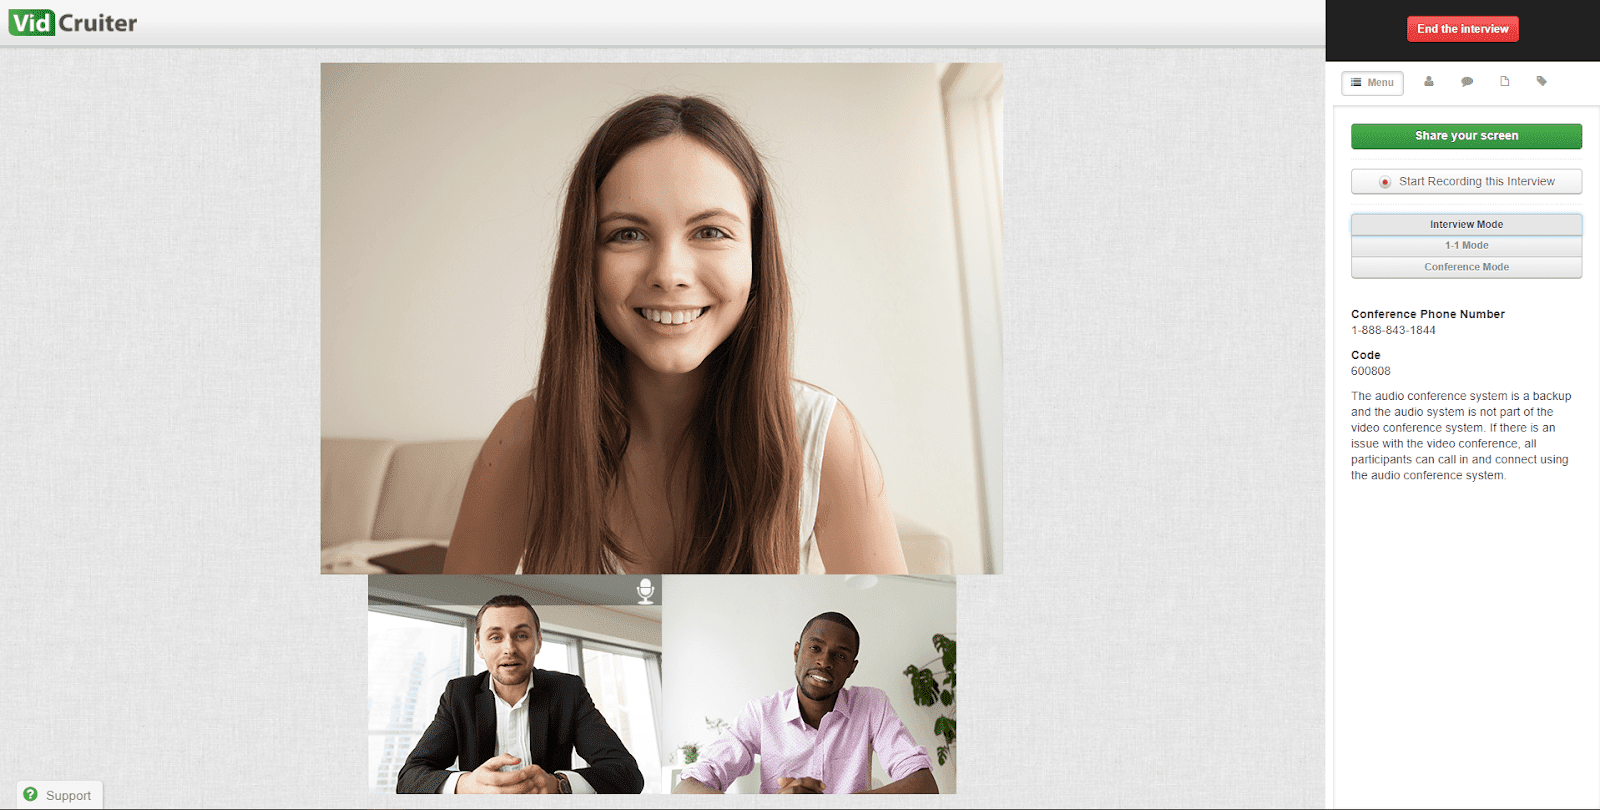 Why Recruiters Should Make the Switch to Video Interviewing Software